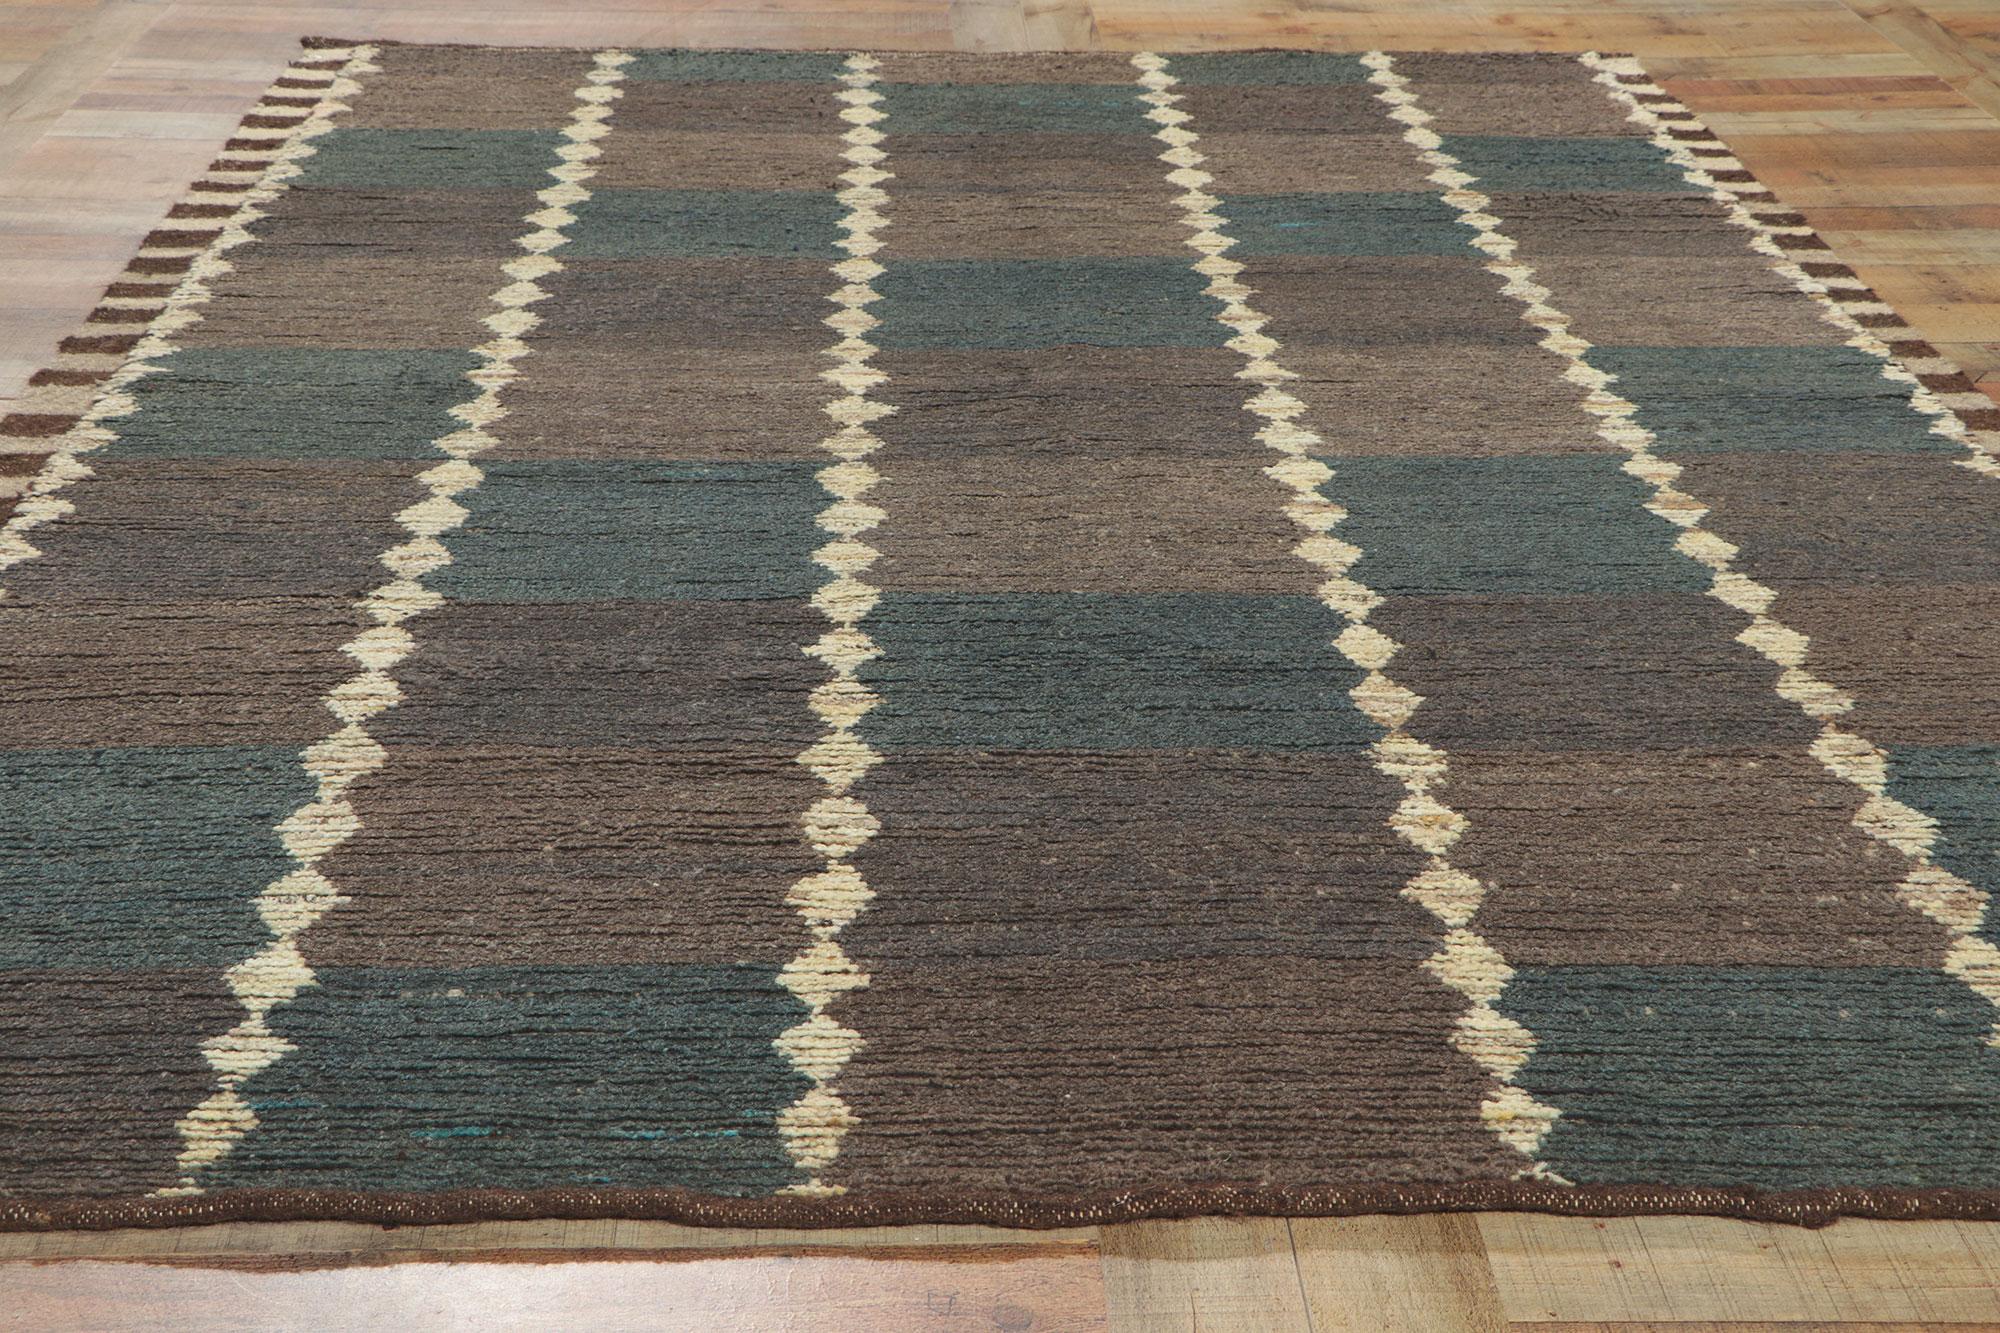 Wool Earth-tone Checkered Moroccan Rug, Masculine Appeal Meets Midcentury Modern For Sale